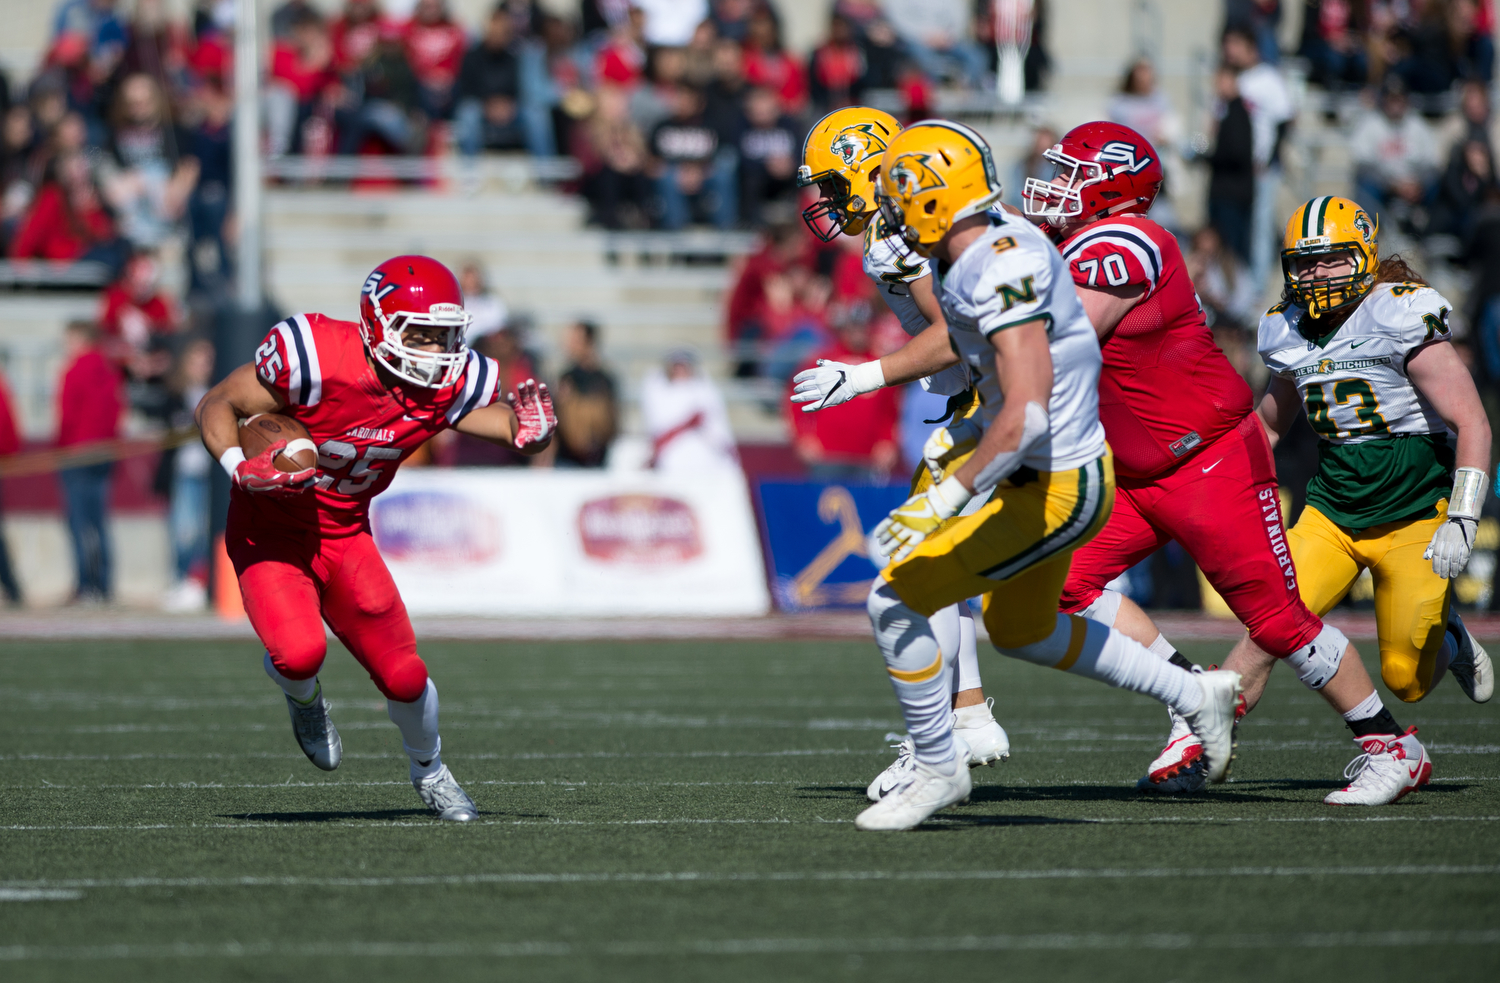 Cardinals claim homecoming victory over Northern Michigan, 30-10